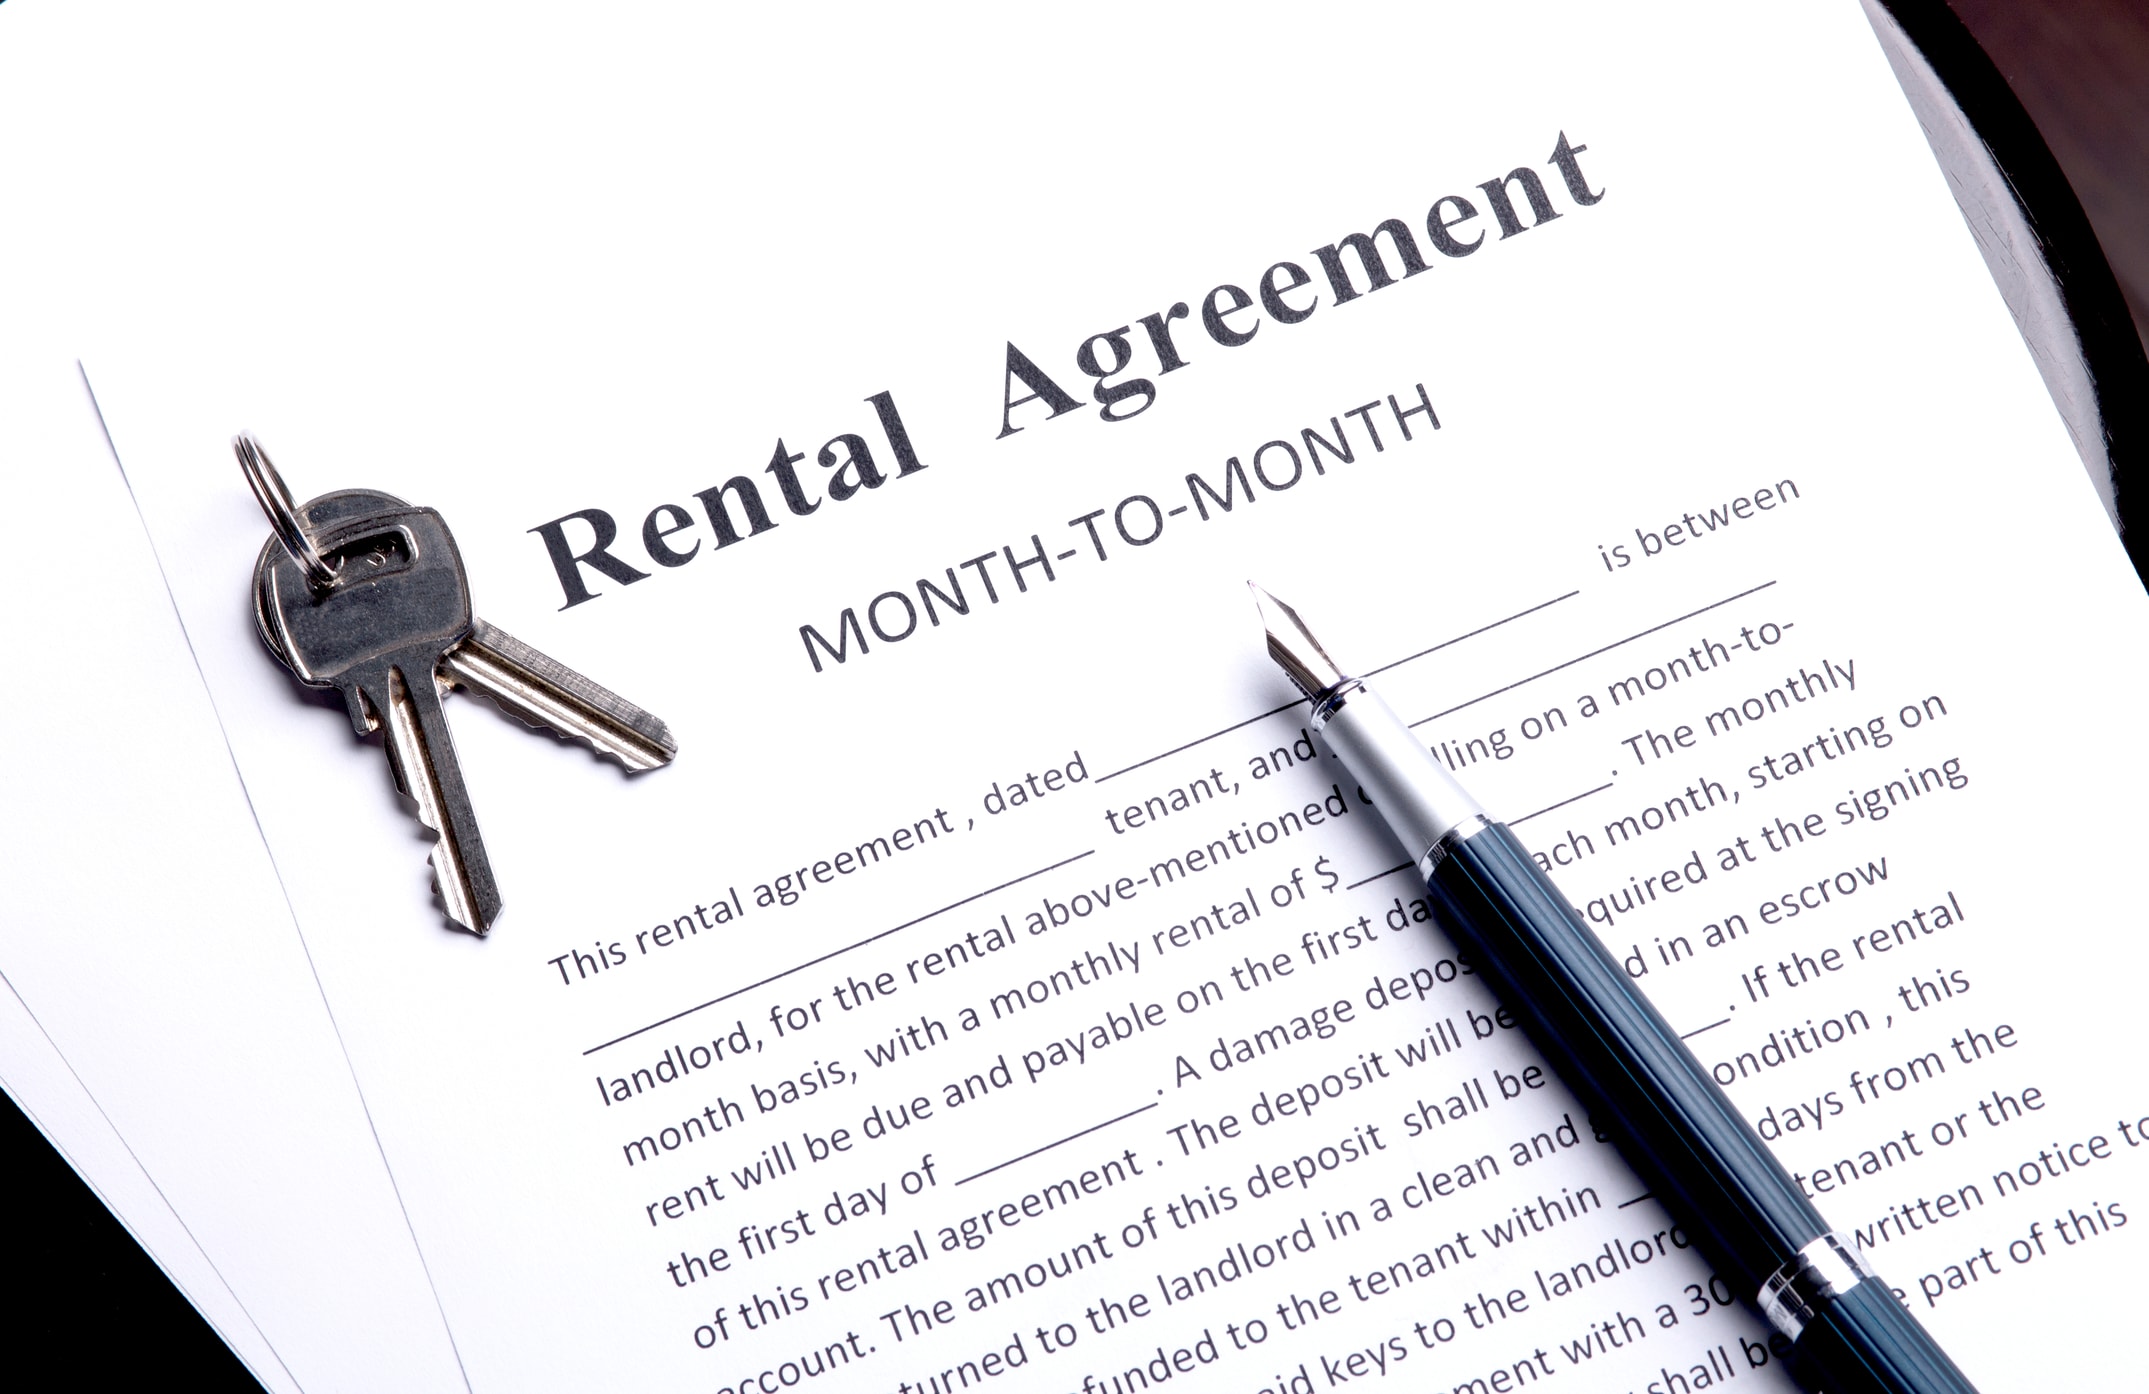 Month-to-Month Rental Agreement, month to month rental agreement form, month to month rental, rental month to month agreement, rental agreement month to month, free monthly rental agreement forms, simple rental agreement month to month, residential lease or month to month rental agreement, month to month lease agreement forms, monthly rent agreement form, month to month lease form, free month to month lease agreement, michigan rental agreement